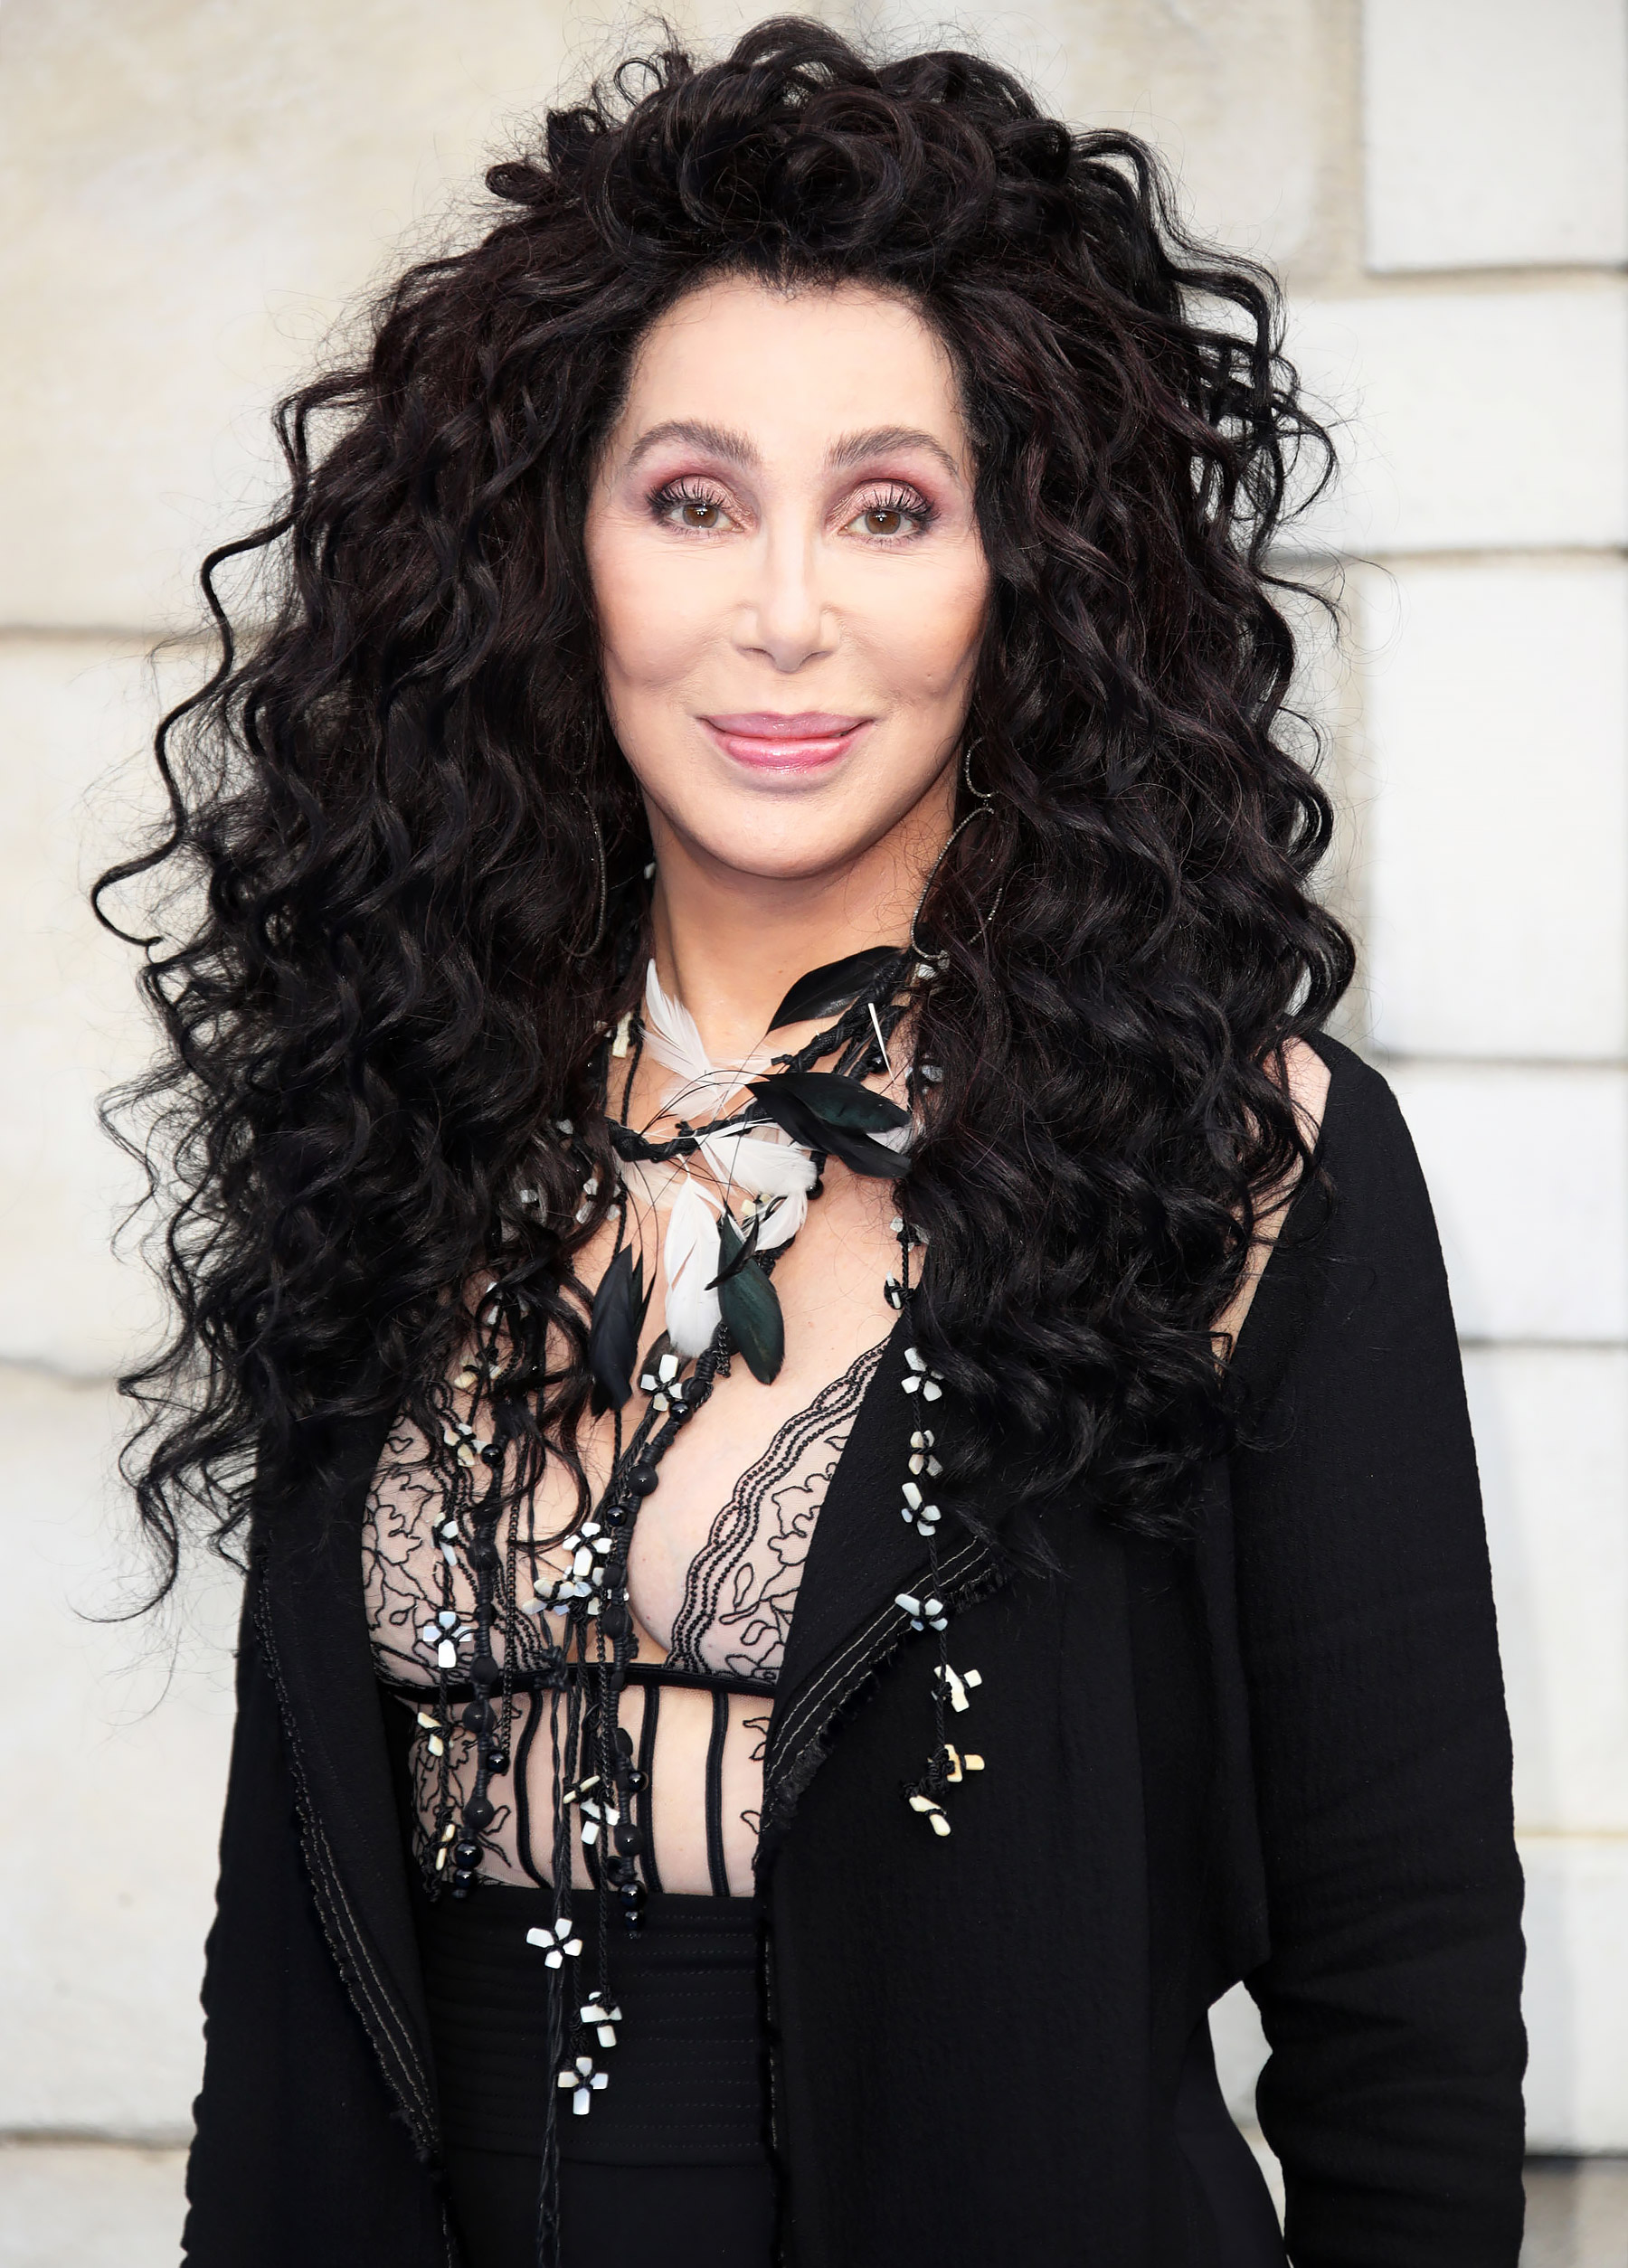 Iconic Singer Cher 72 Revealed The Secret To Her Ageless Appearance Small Joys 